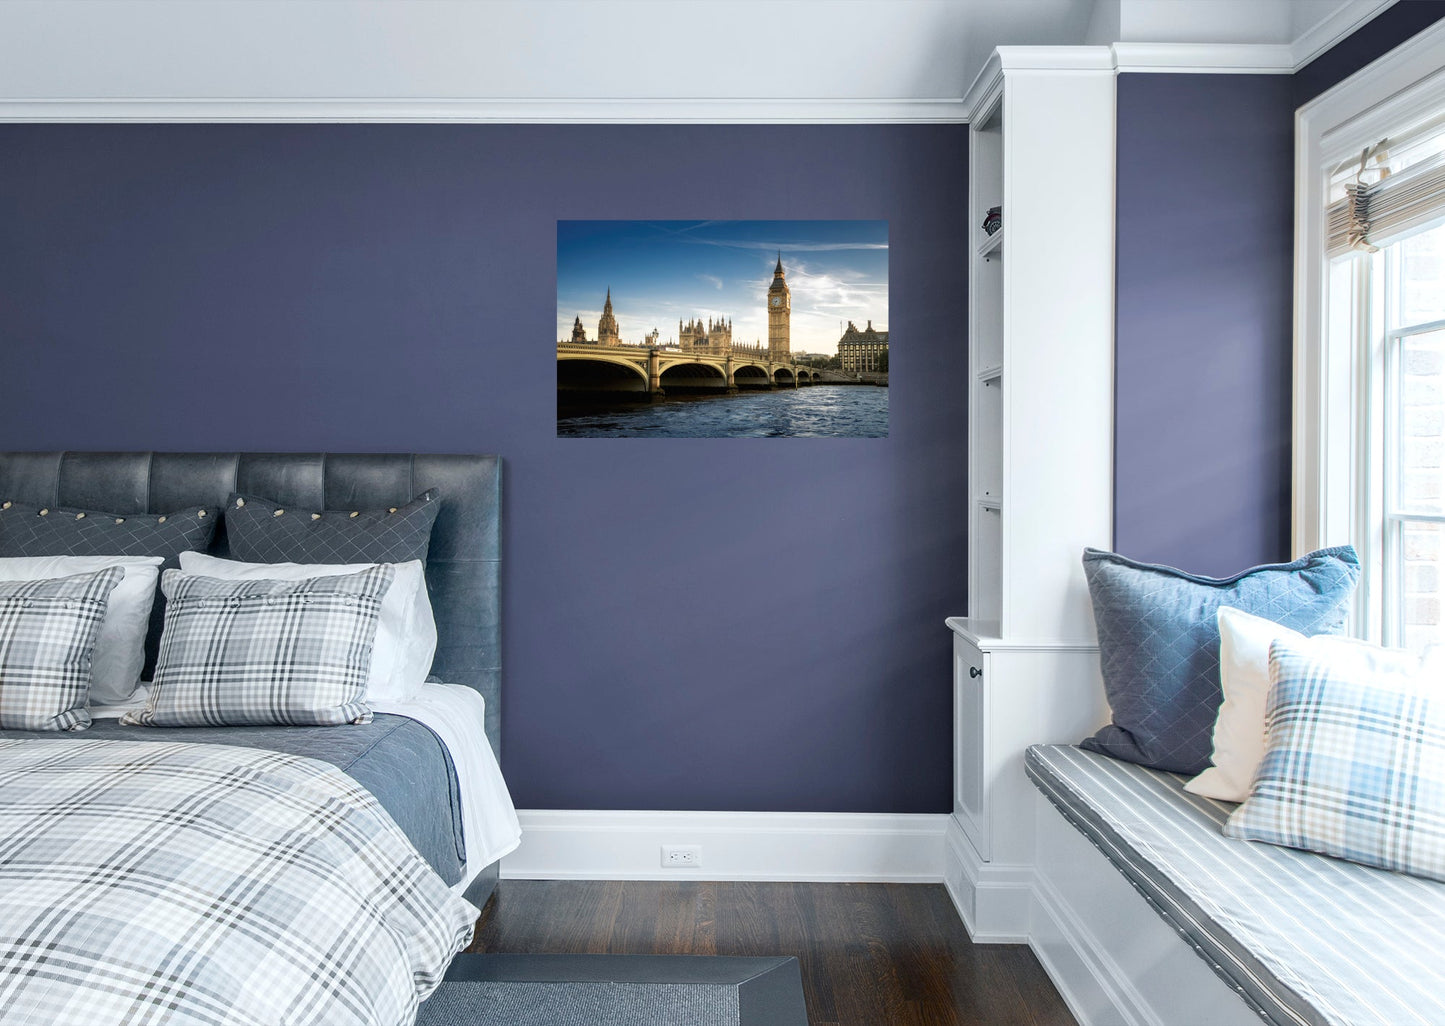 Popular Landmarks: London Realistic Poster - Removable Adhesive Decal